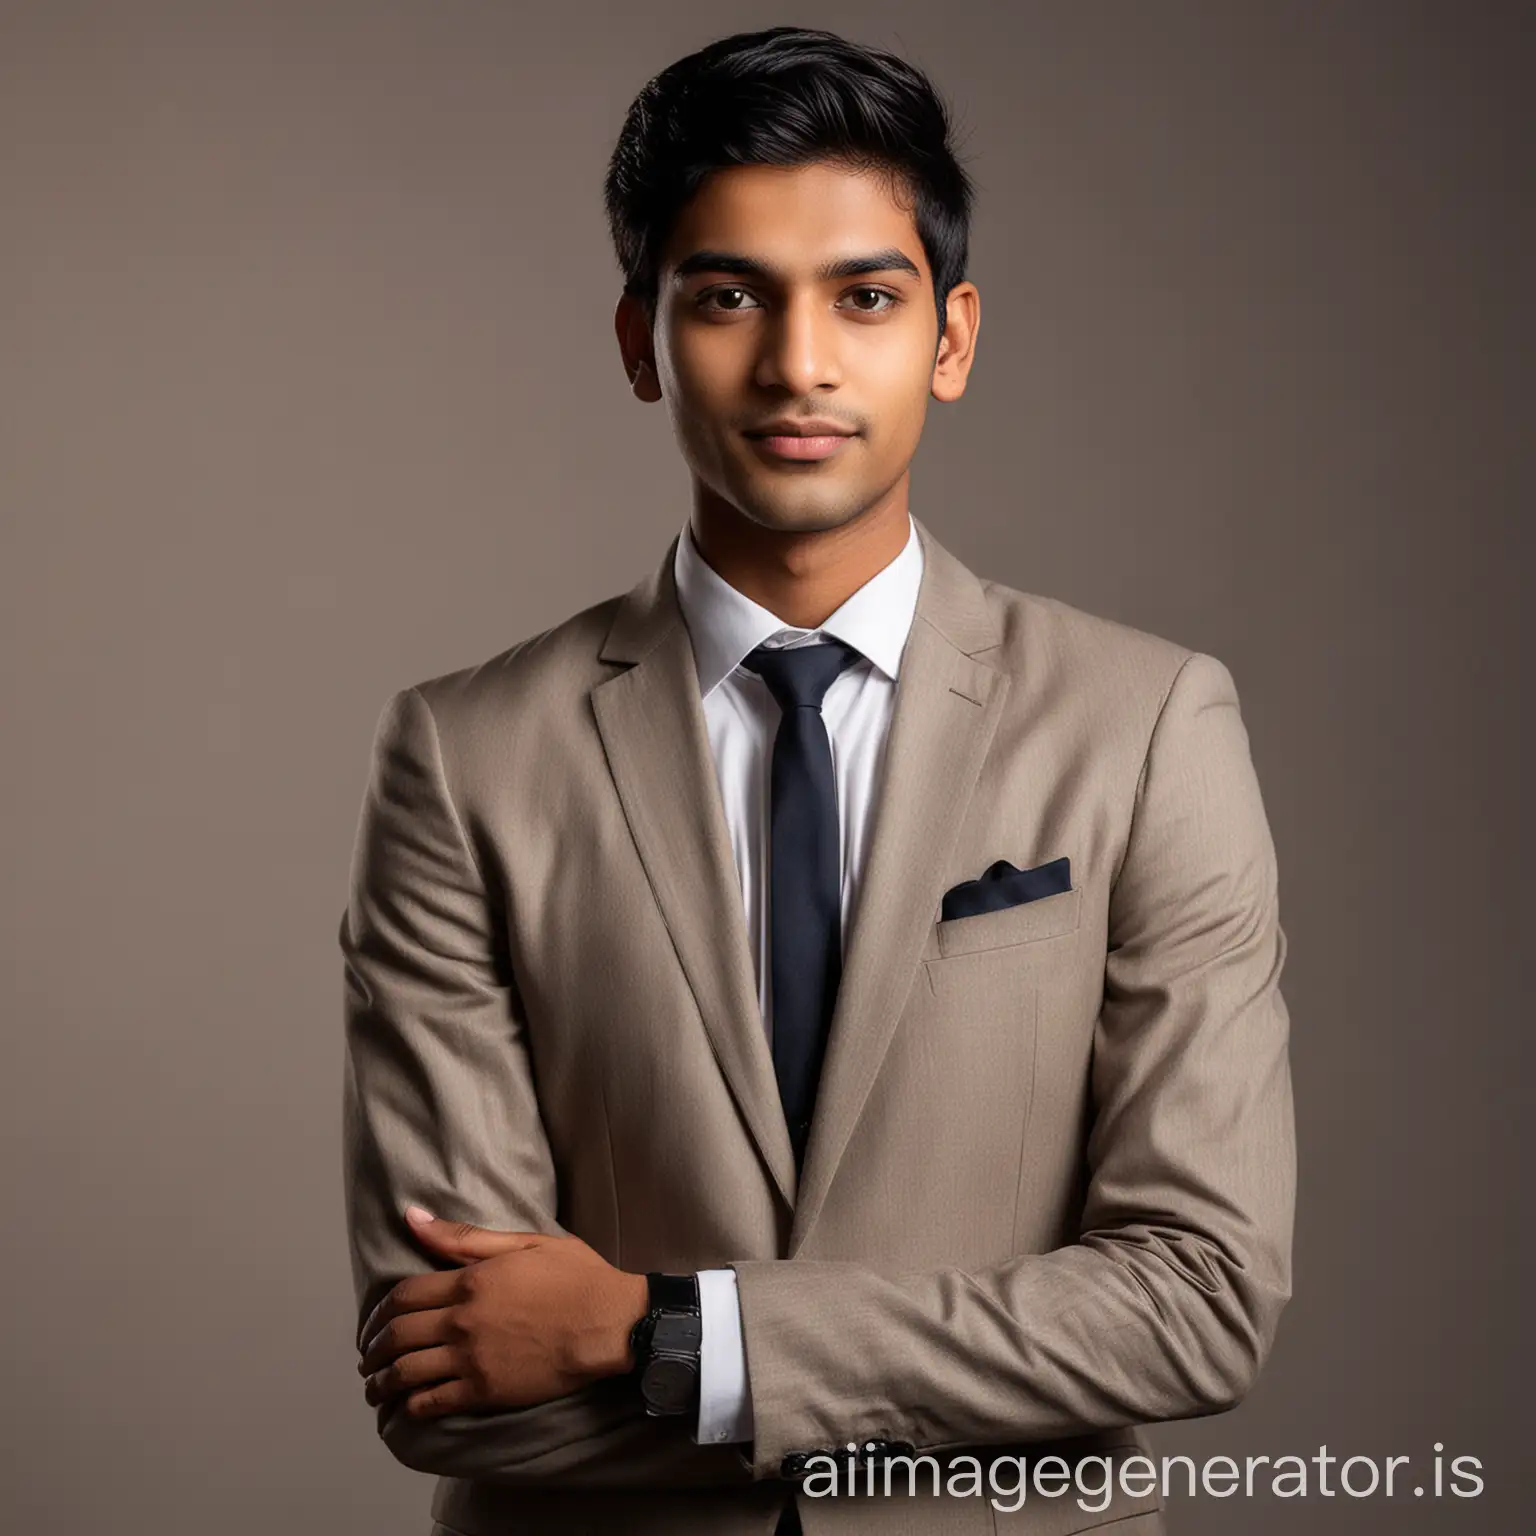 Young-Indian-Man-in-Formal-Attire-Posing-for-LinkedIn-Profile-Picture-with-Backlit-Background